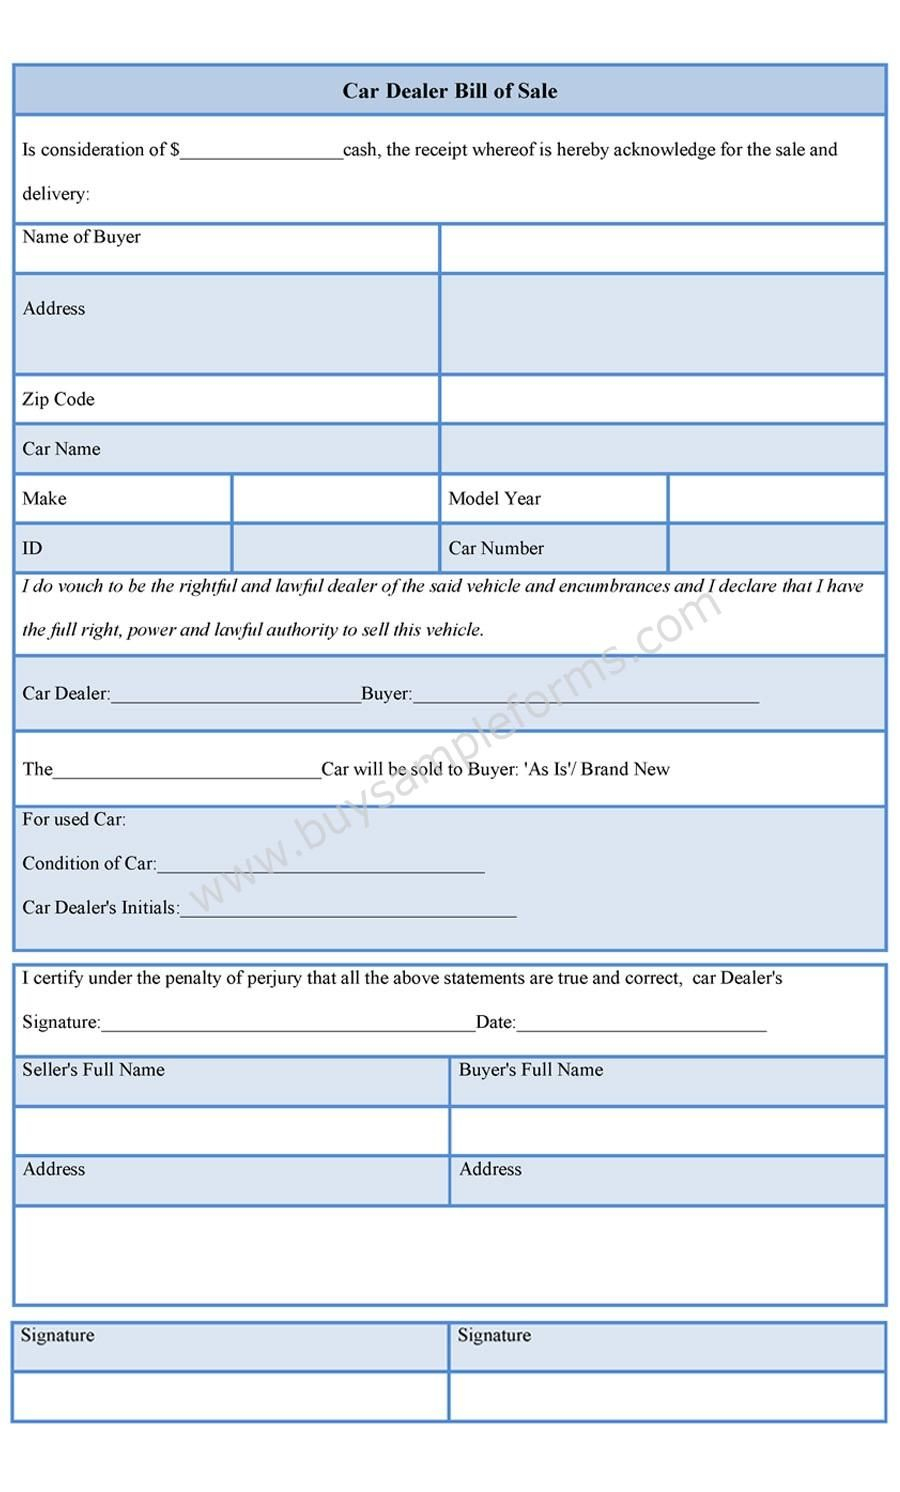 Car Dealer Bill Of Sale Form Bill Of Sale Forms Pinterest Cars with regard to dimensions 900 X 1492